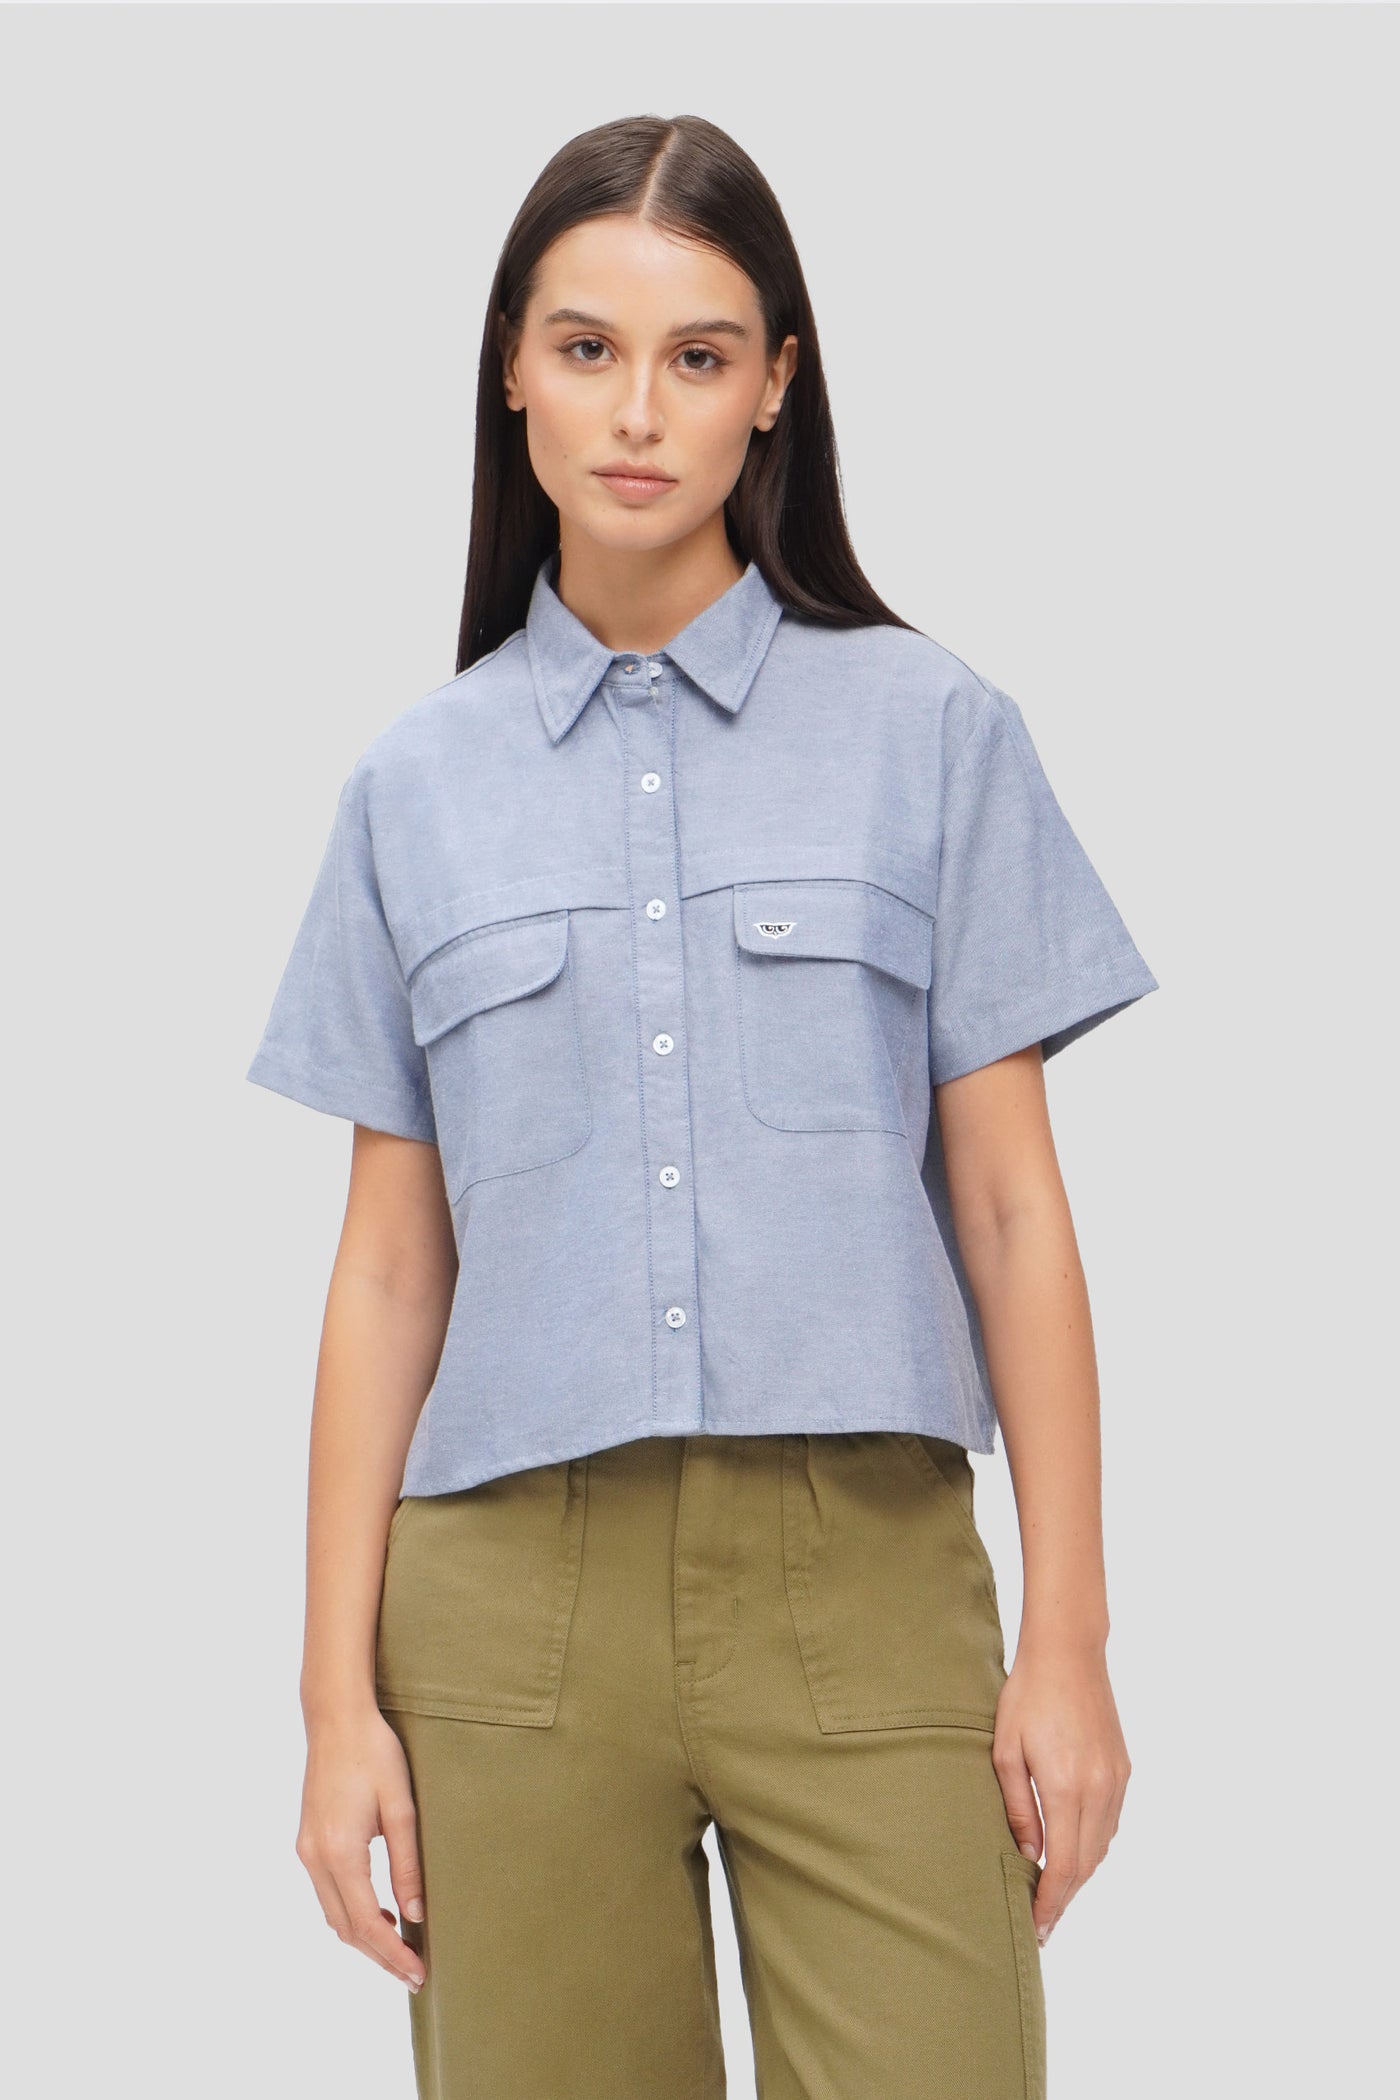 Shirt with Pockets